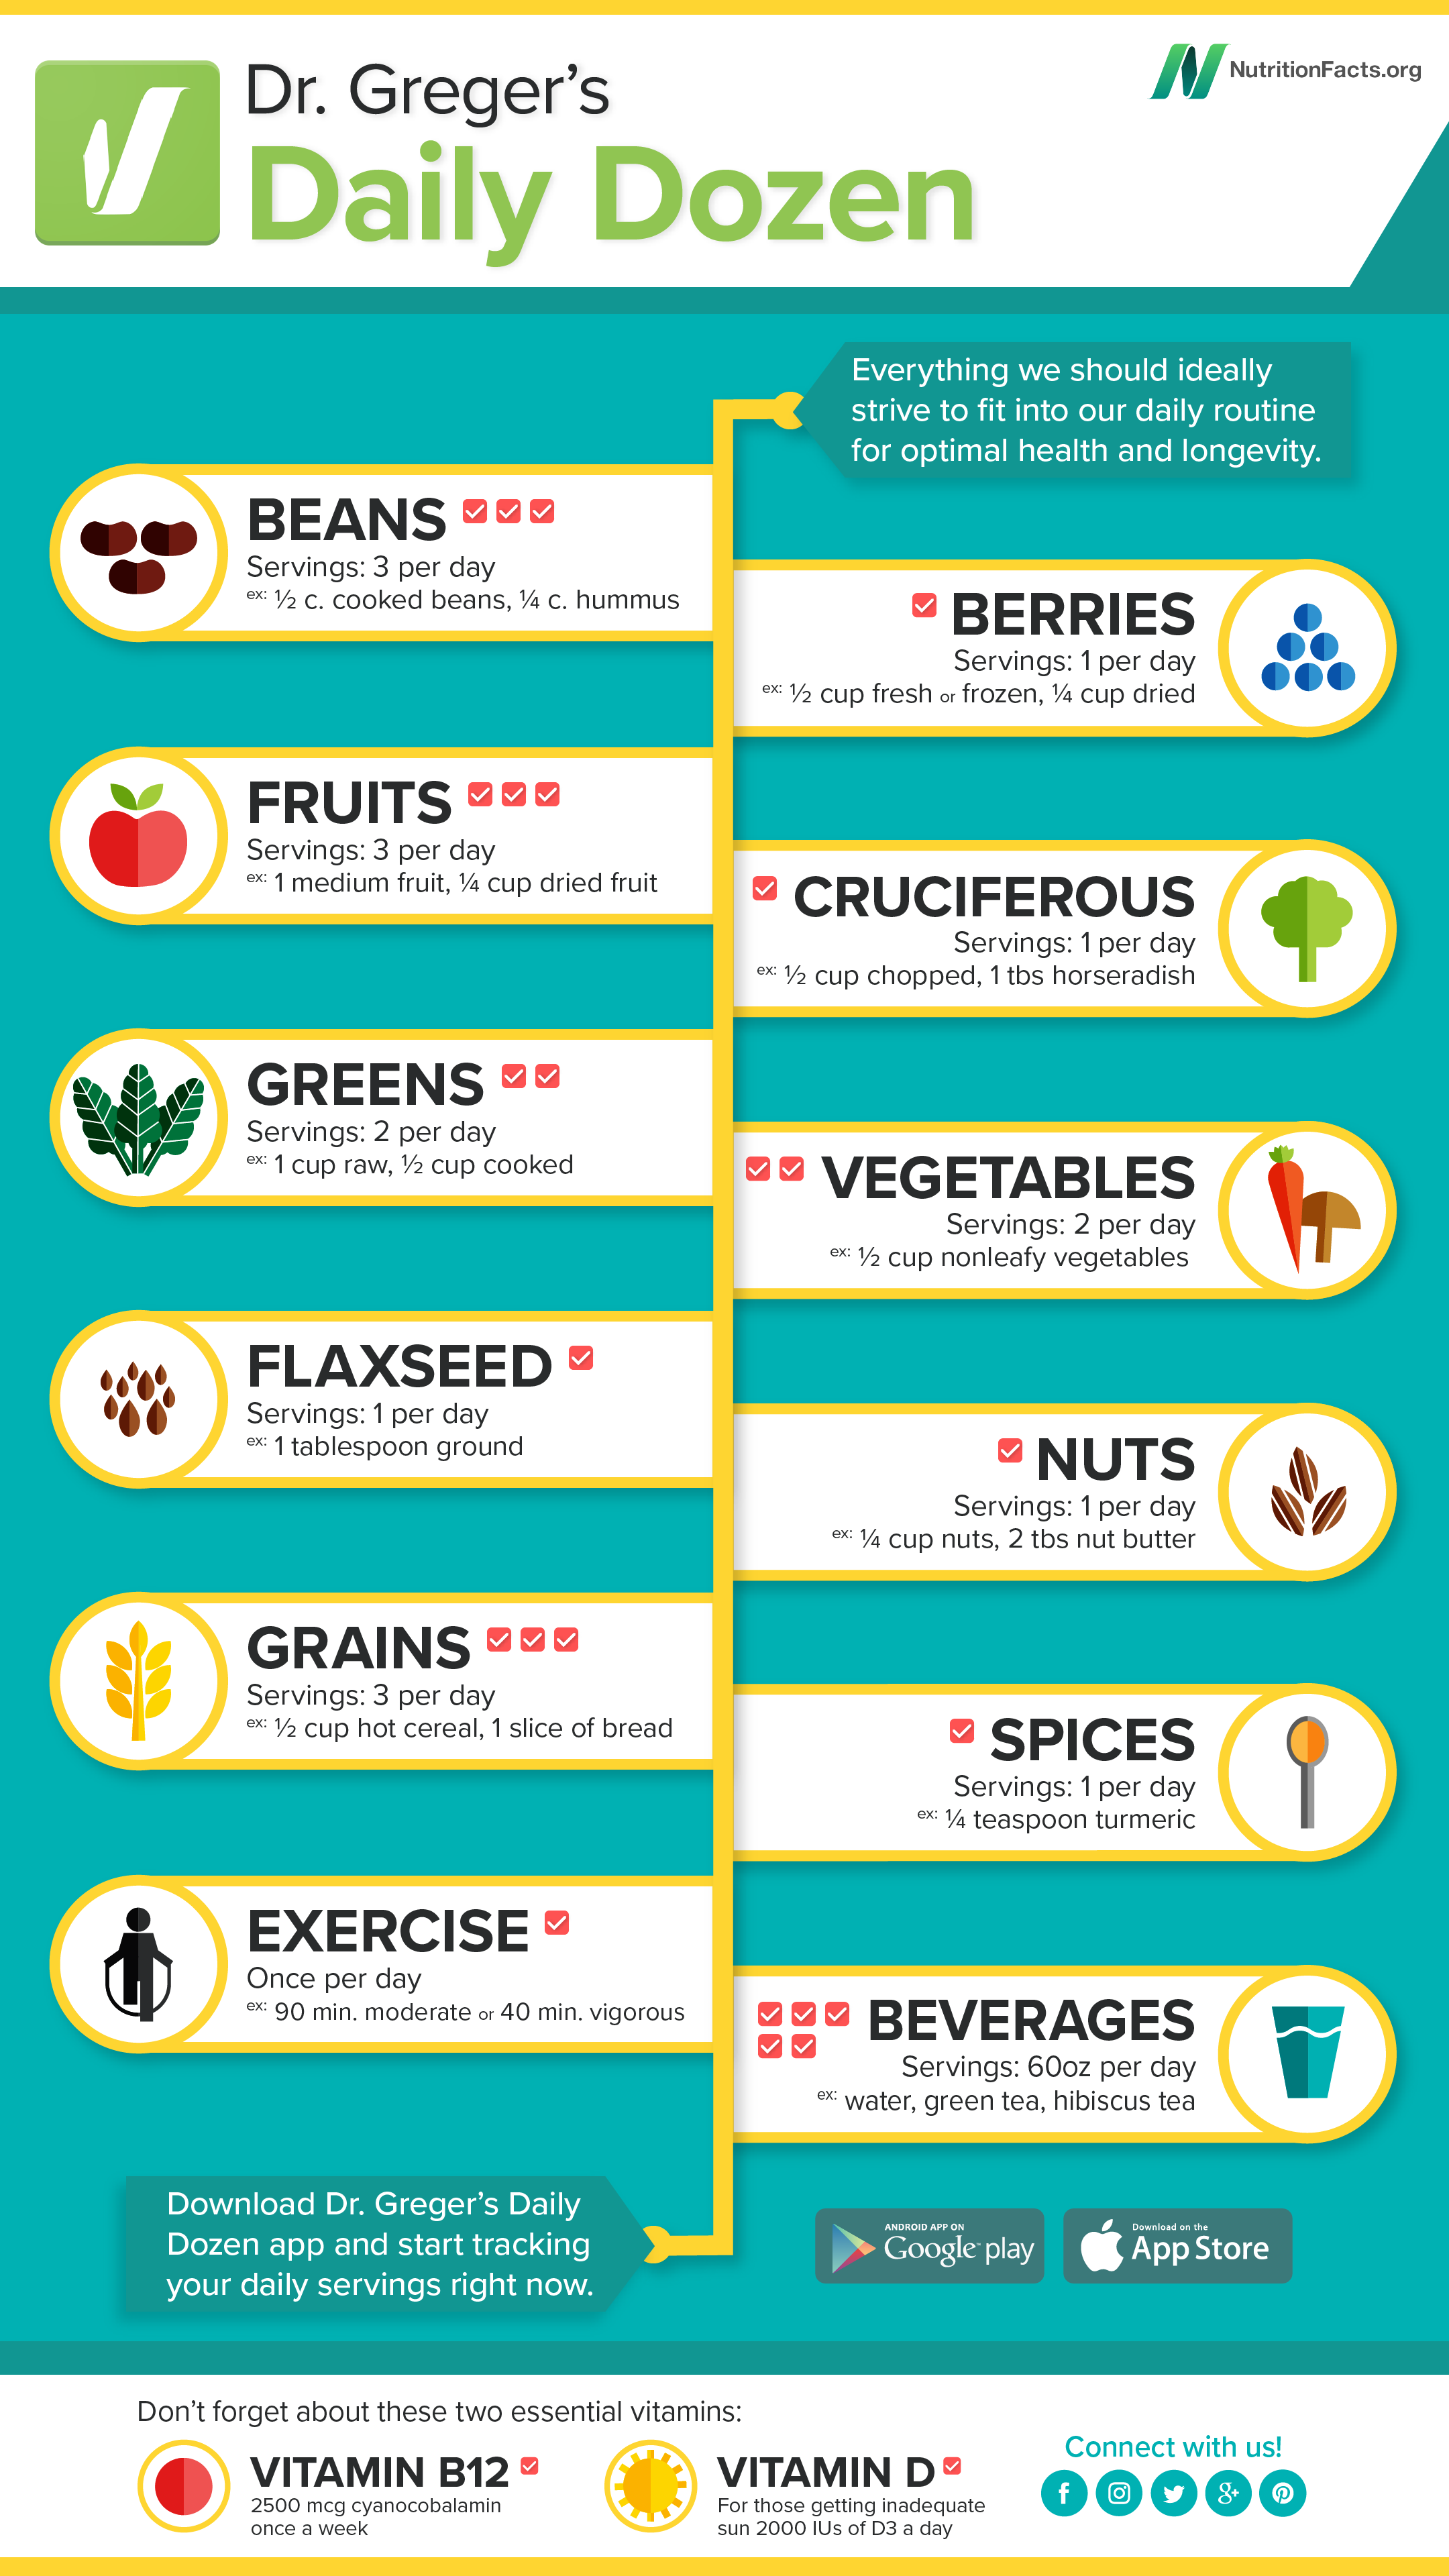 "Dr. Greger's Daily Dozen" infographic with Imperial units